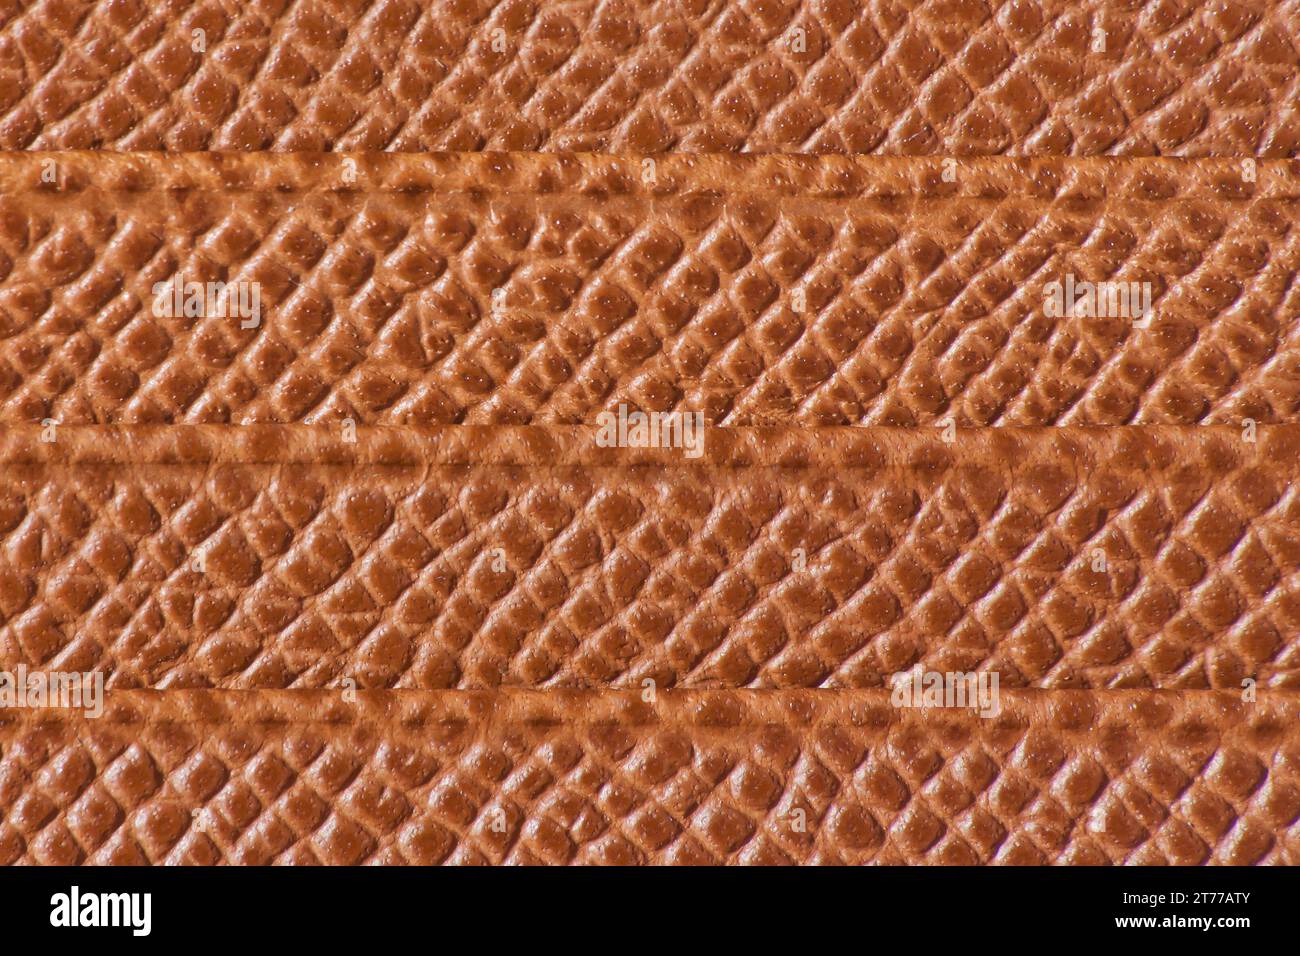 light brown leather texture with horizontal lines for background Stock Photo